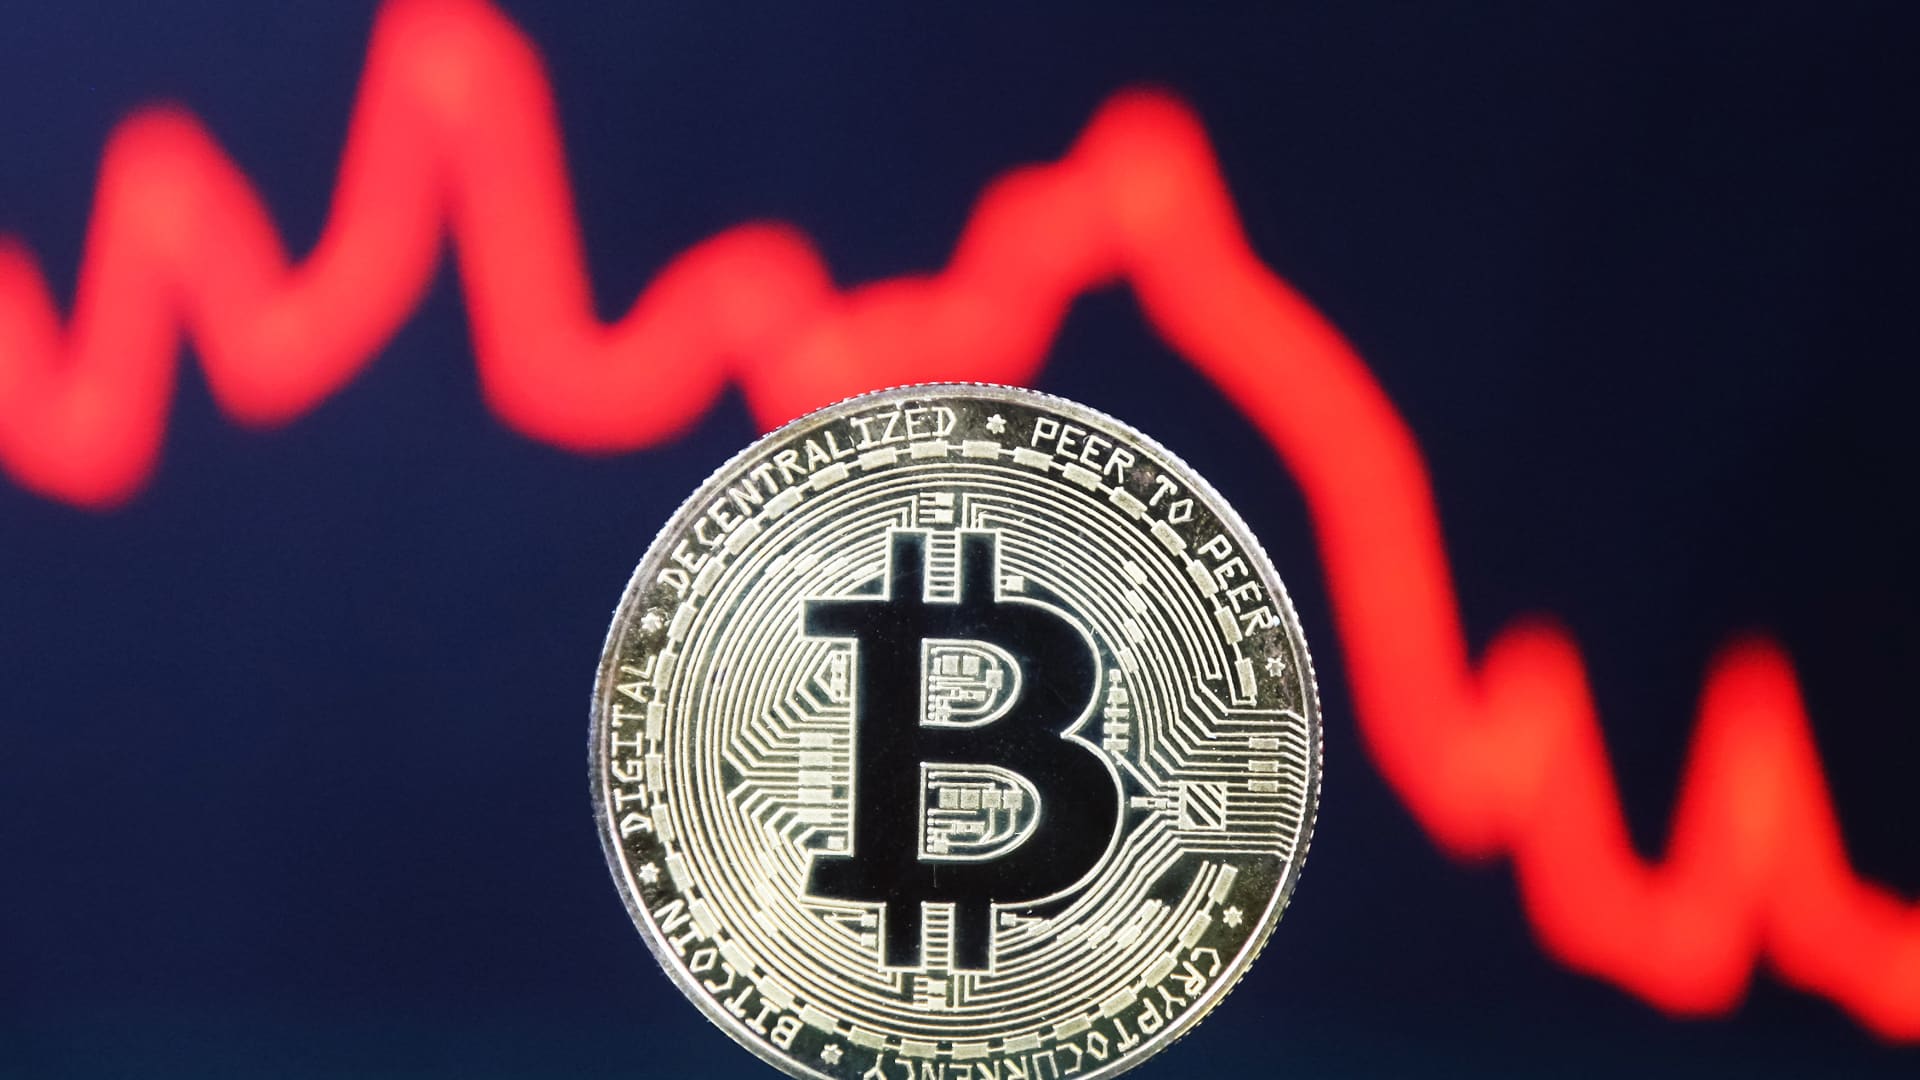 Bitcoin slides to two-month low as Fed signals it's not ready to cut rates yet